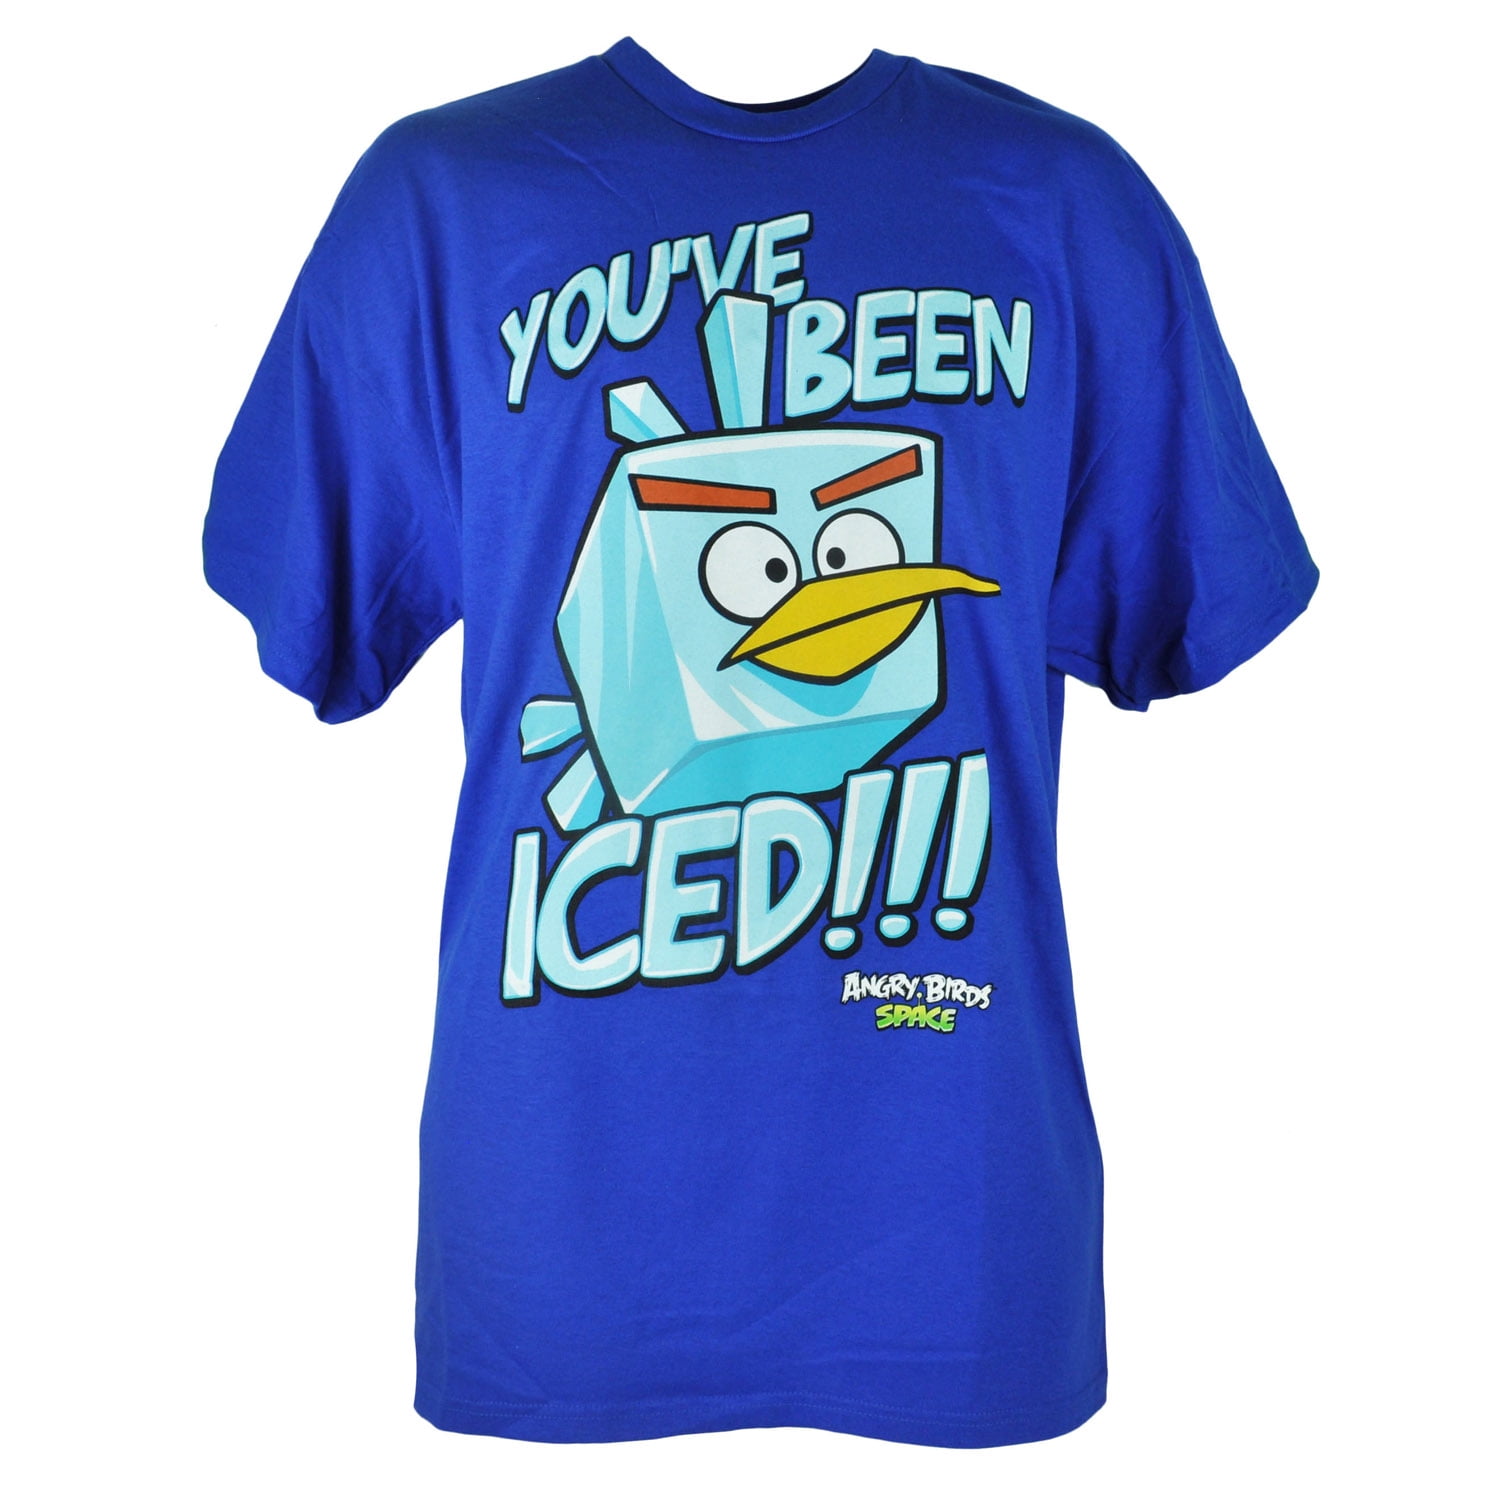 Space Ice Youve Been Iced Phone Video Game Blue Tshirt Tee Small